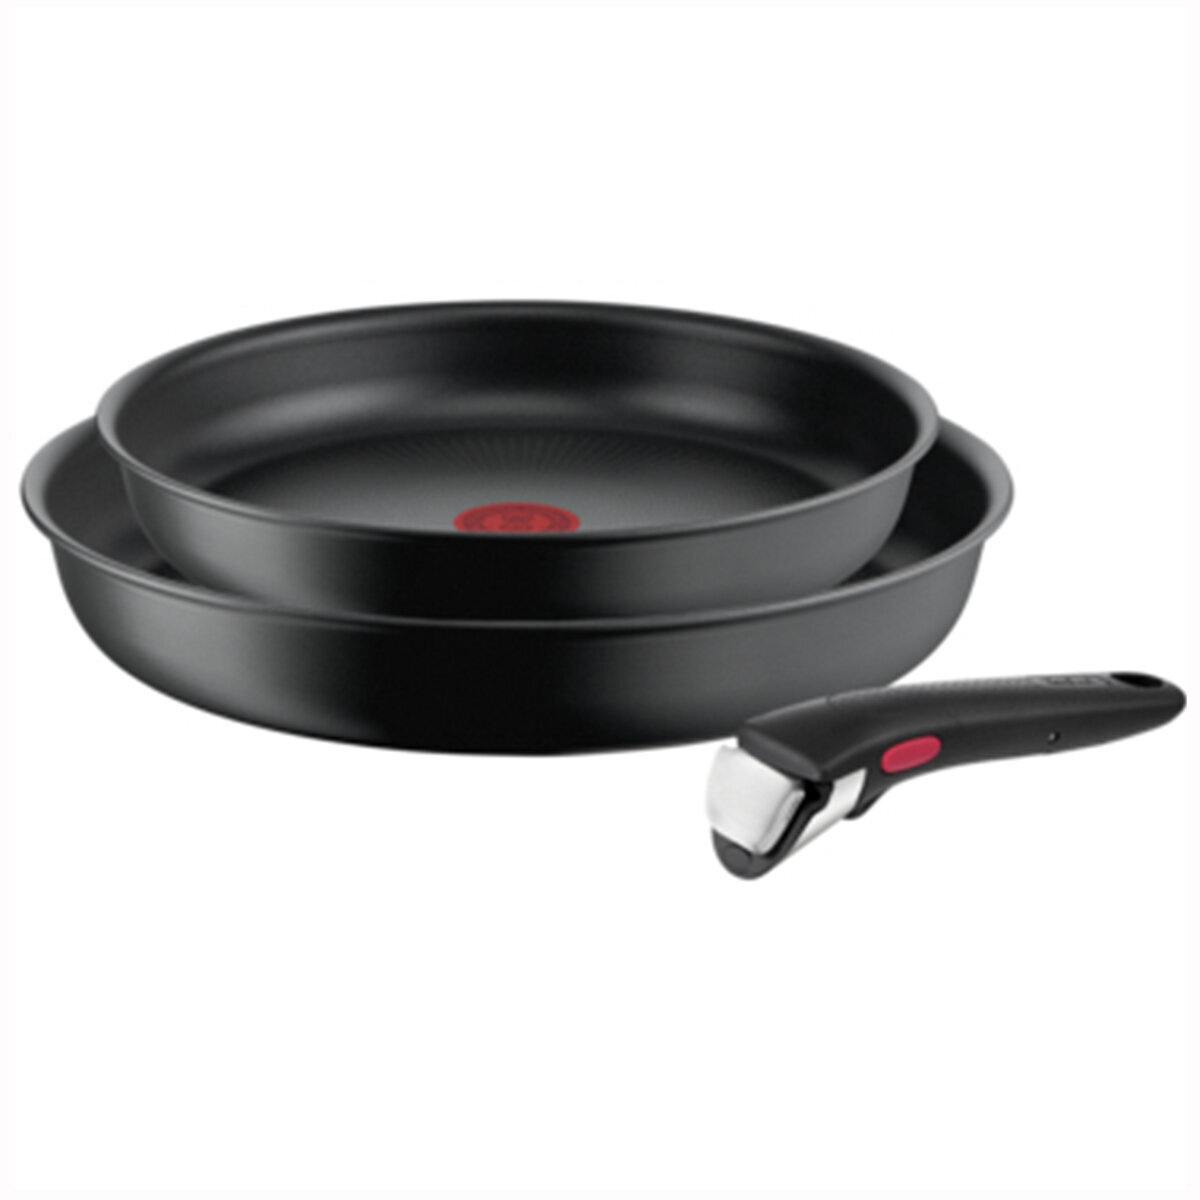 Tefal Ingenio Ultimate Induction Non-Stick 3 Piece Frypan Cookware Set  L7649253